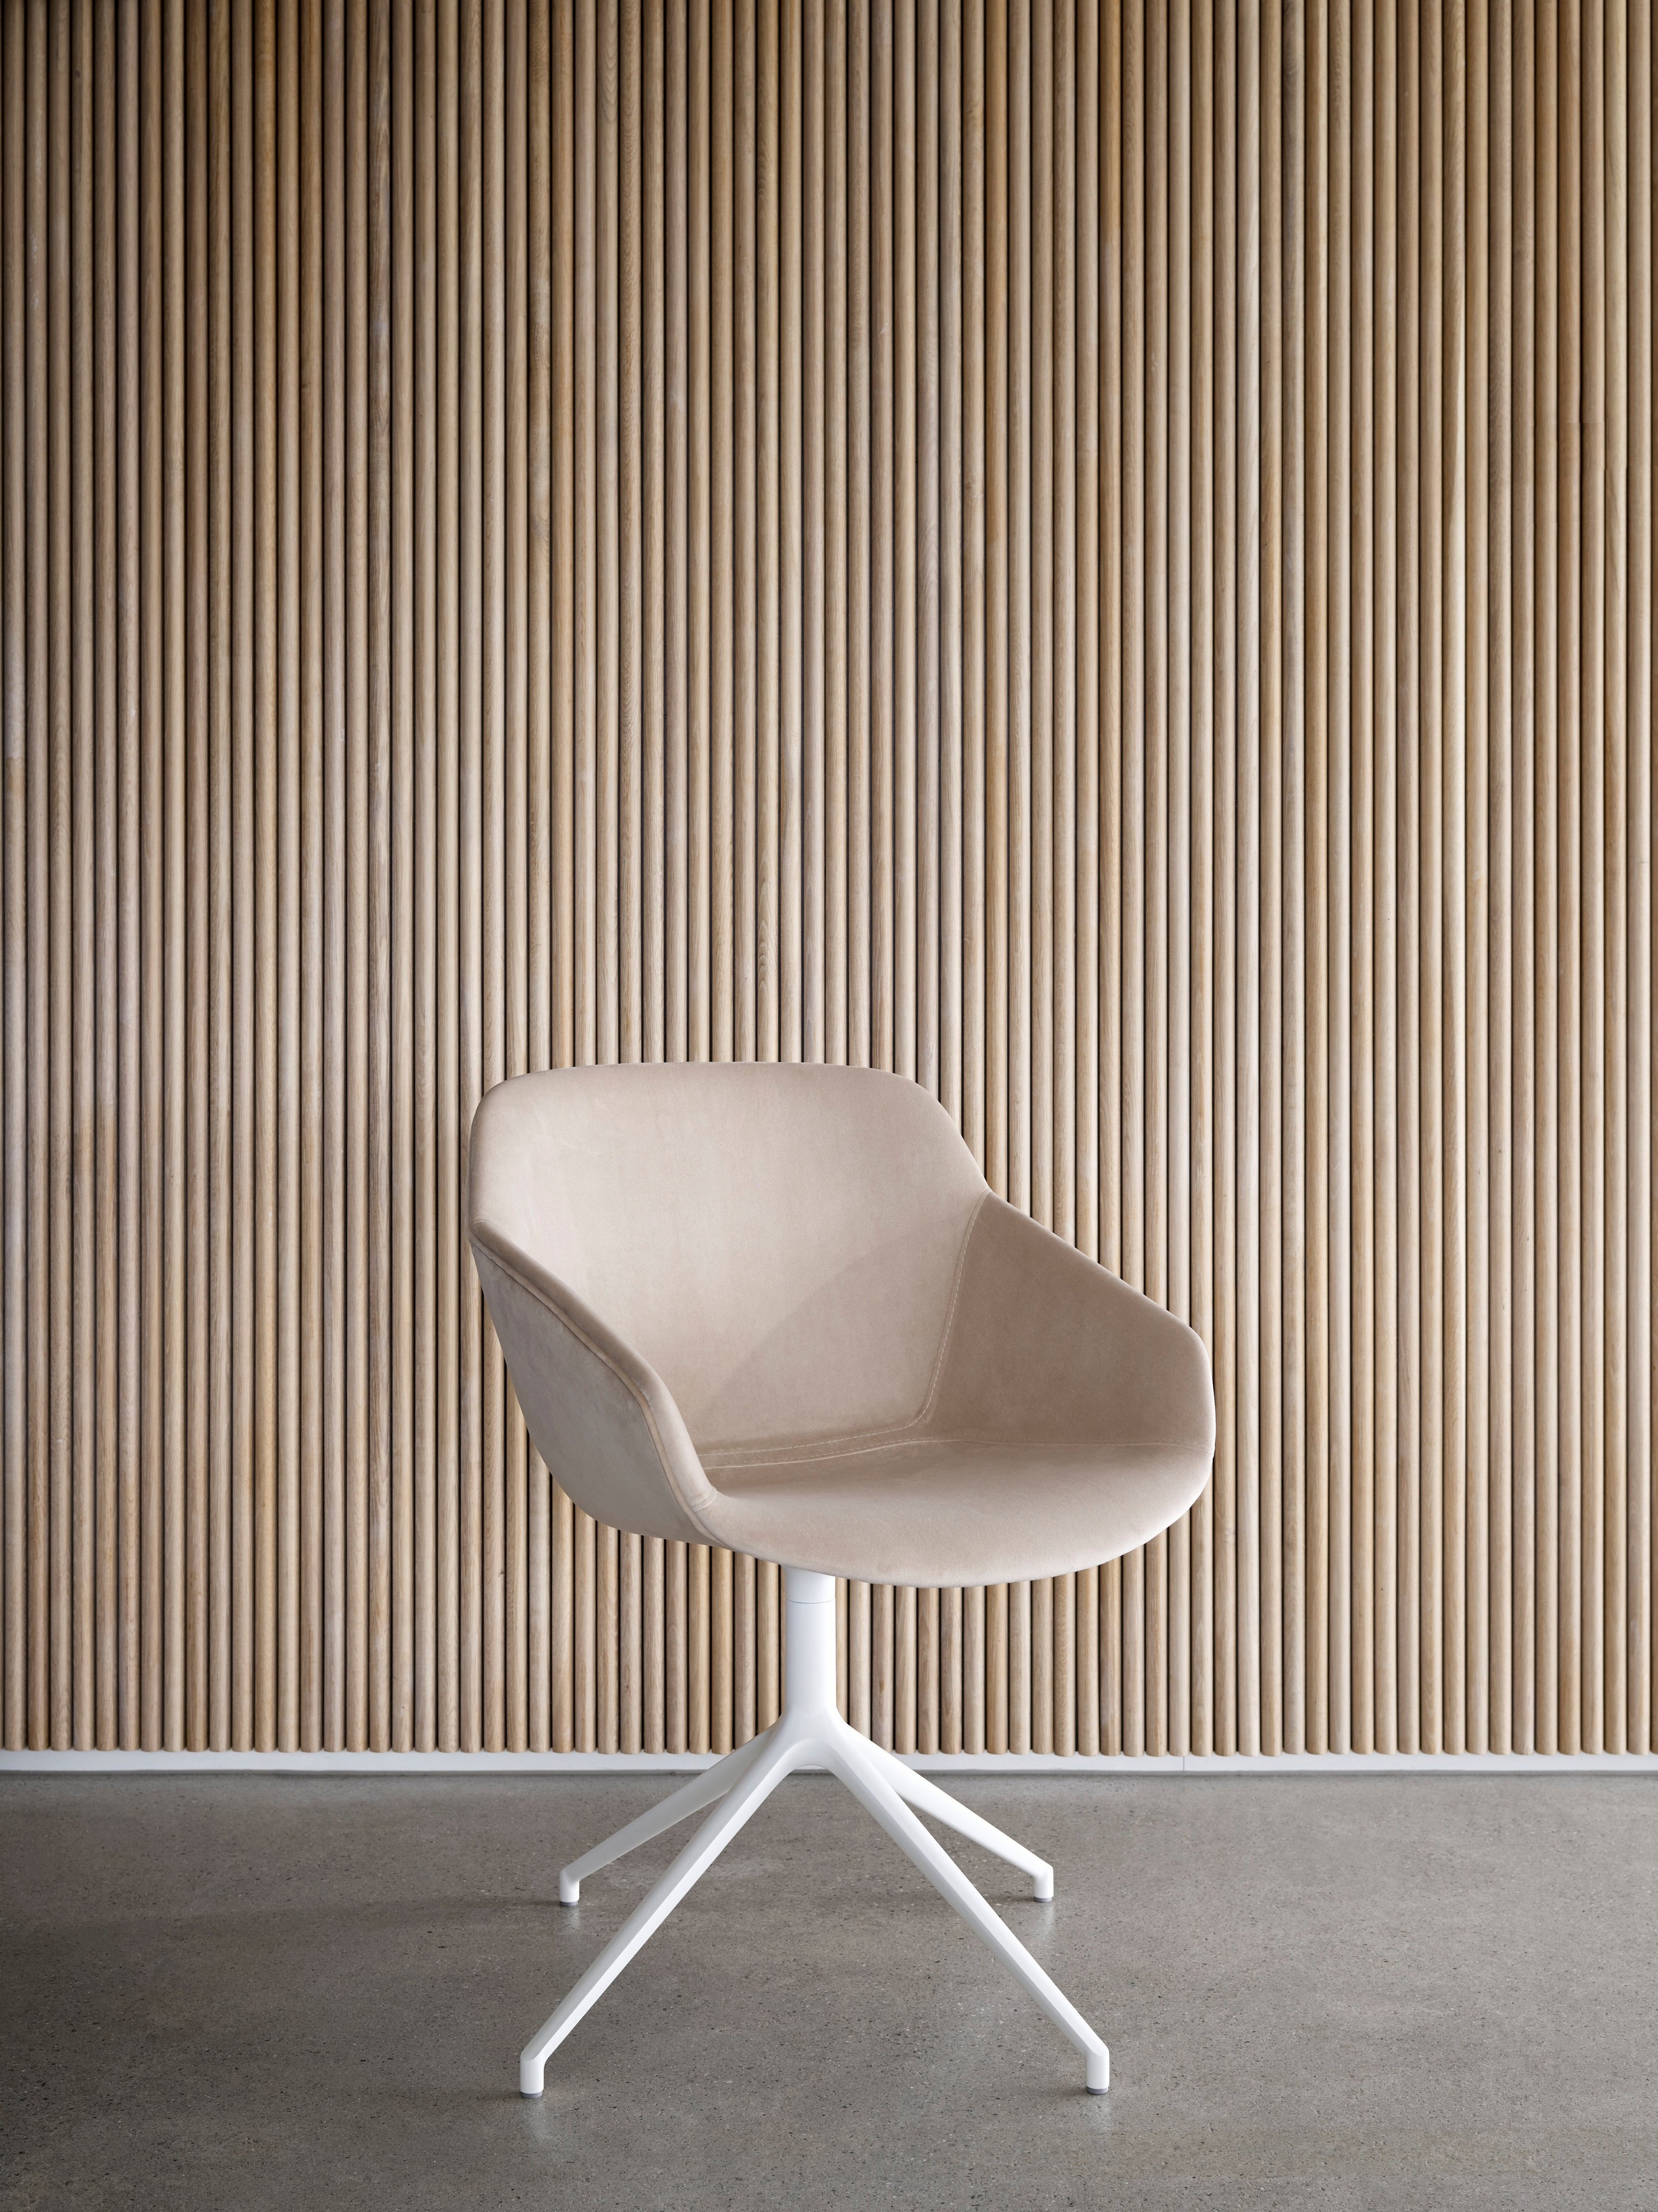 Beige chair with white base against a vertical wooden-slat wall